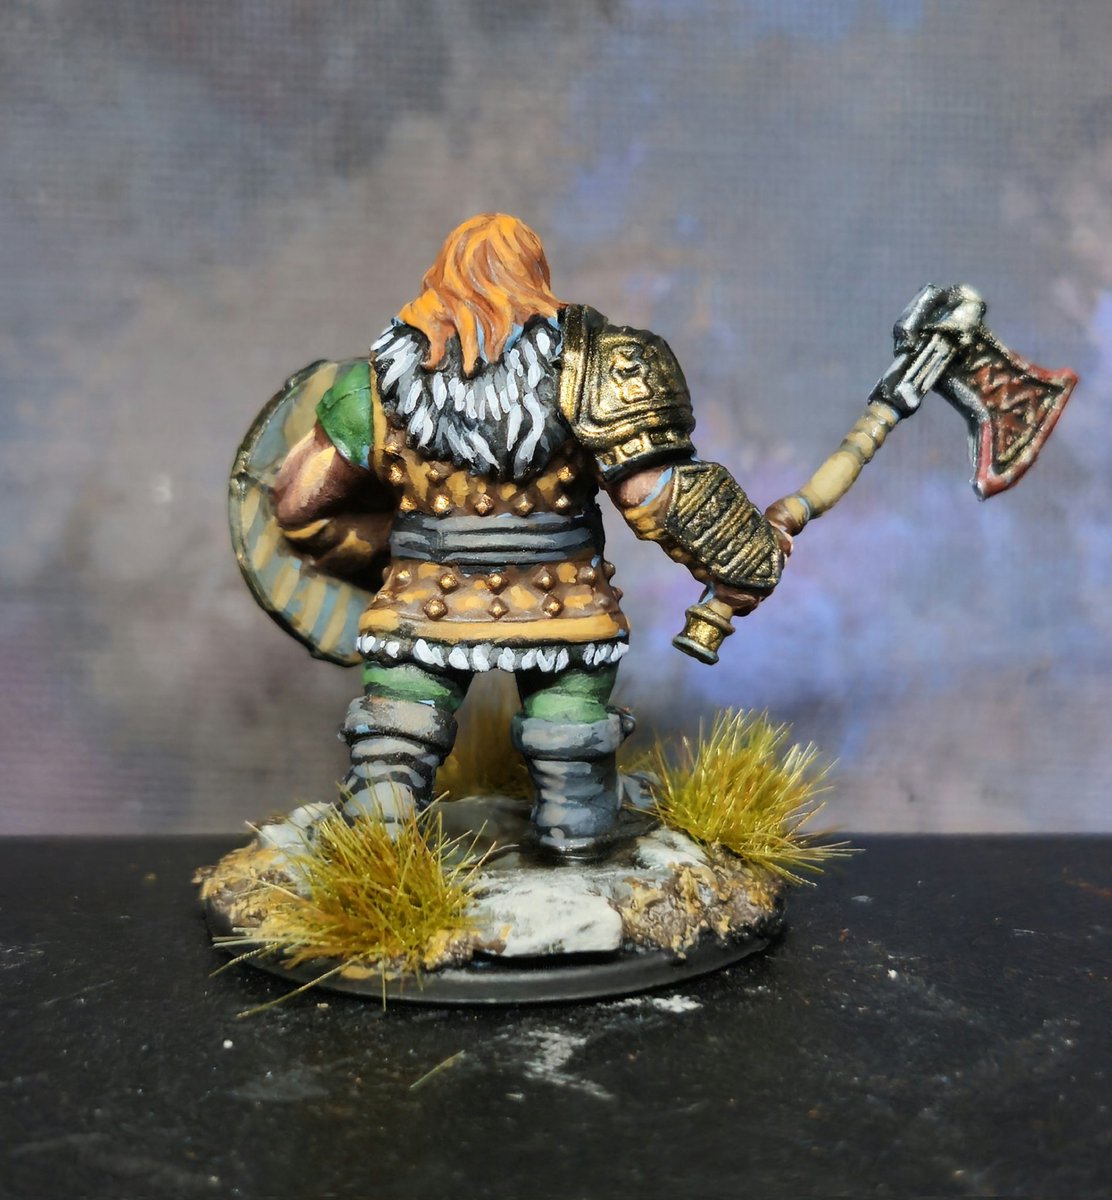 These two Dwarven warriors were painted for a client's collection and PCs in his D&D game. He wanted greens & bronze for the armor & clothes. Quite the Loki theme for the one with the horned helm! 
 #PaintingMiniatures #minipainting #miniatures #commissionpainting #DandD